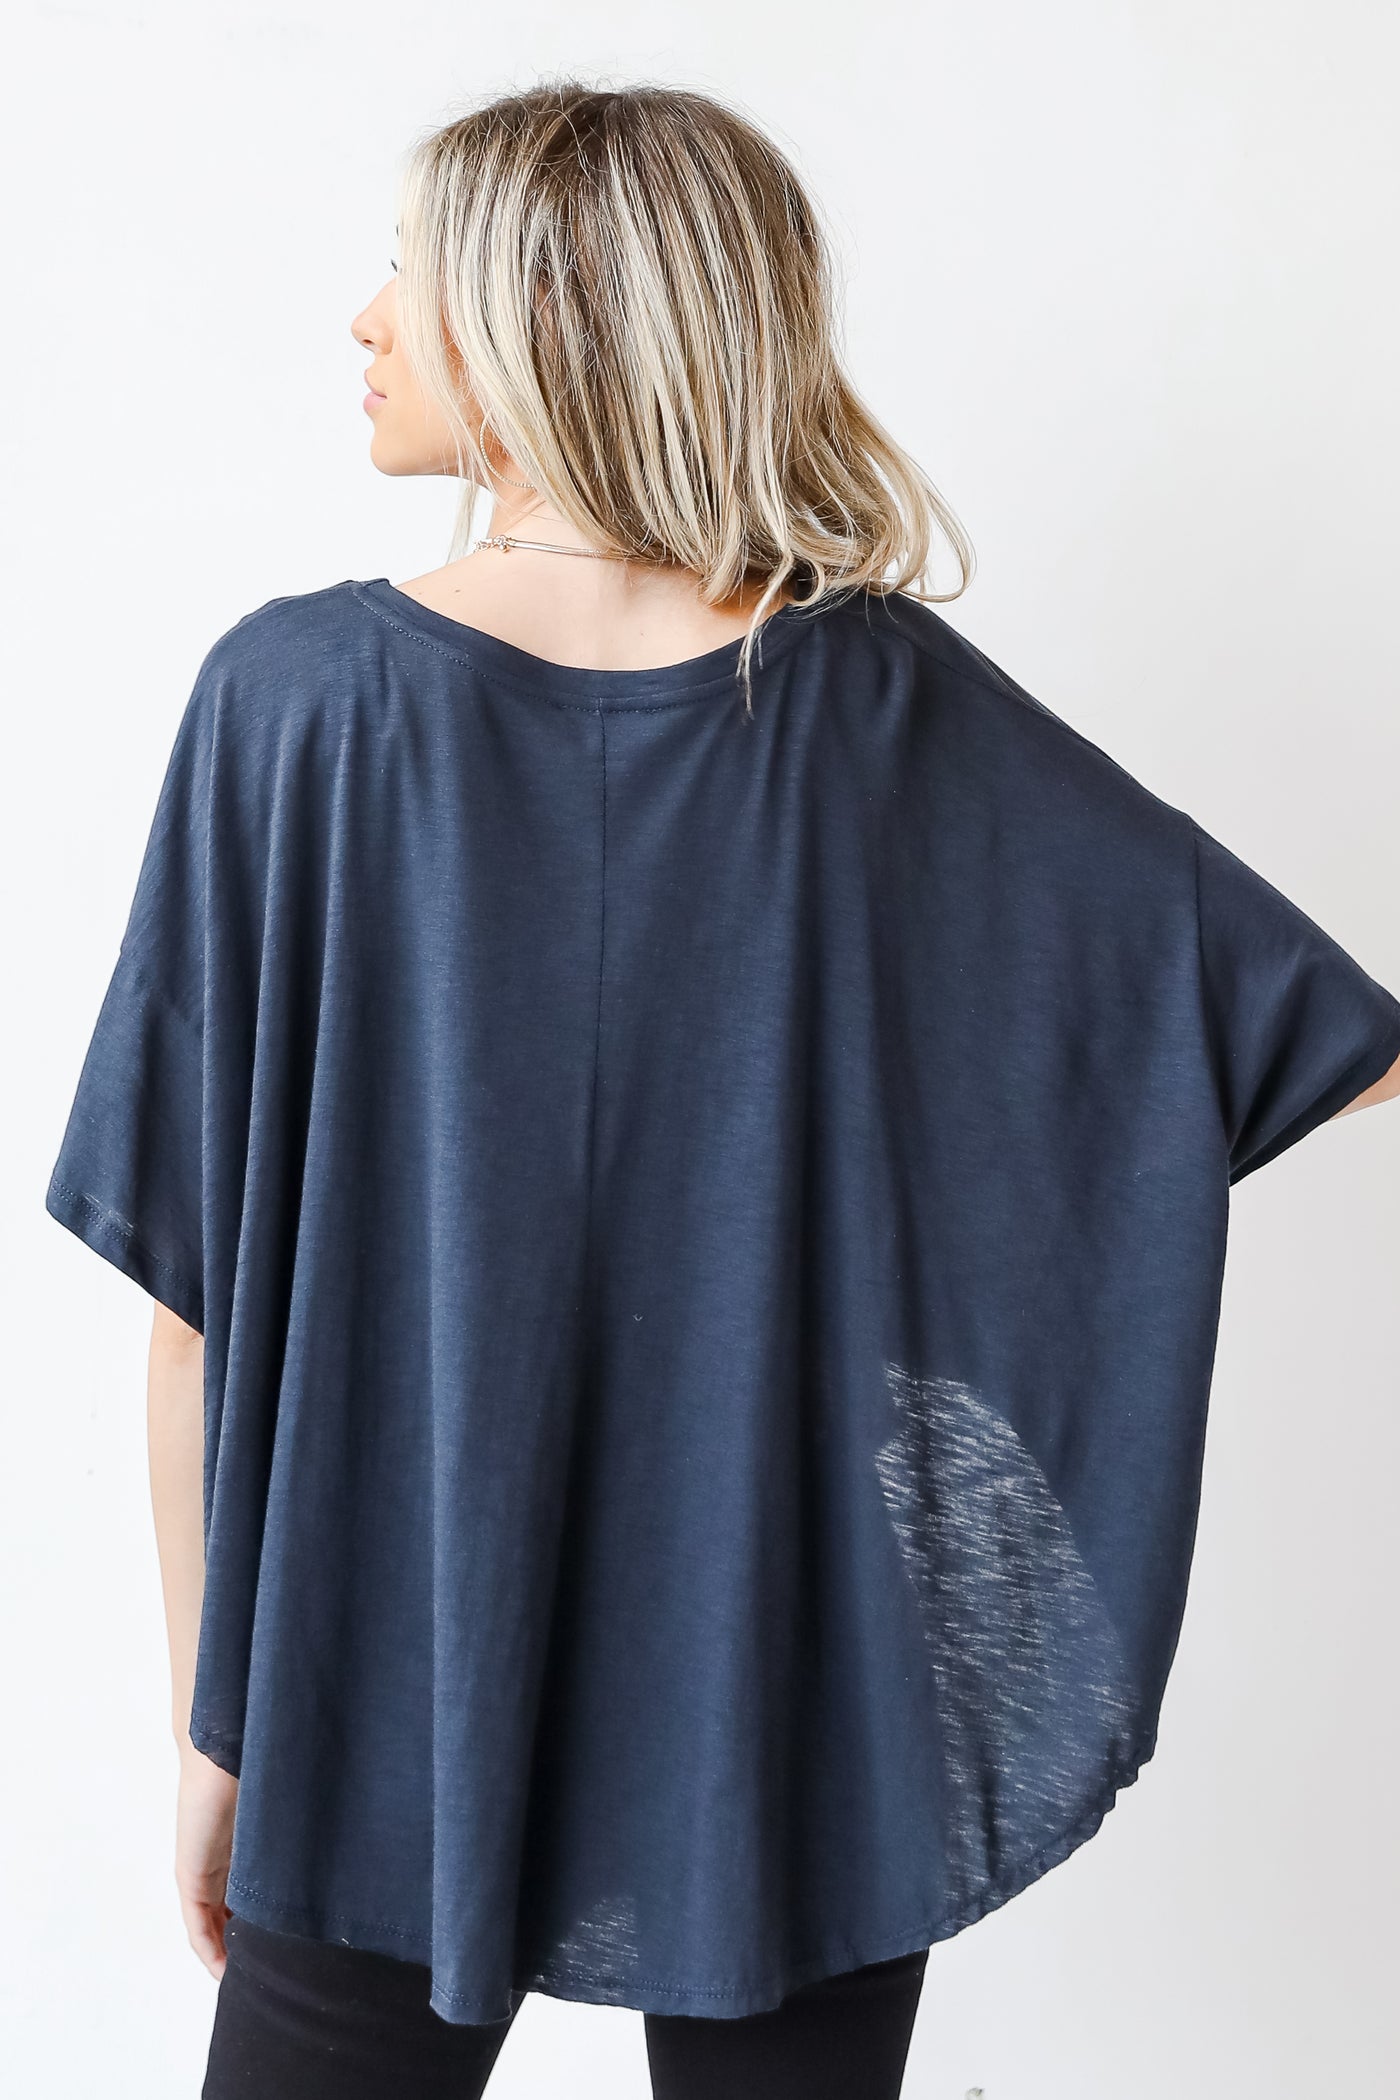 Oversized Tee back view